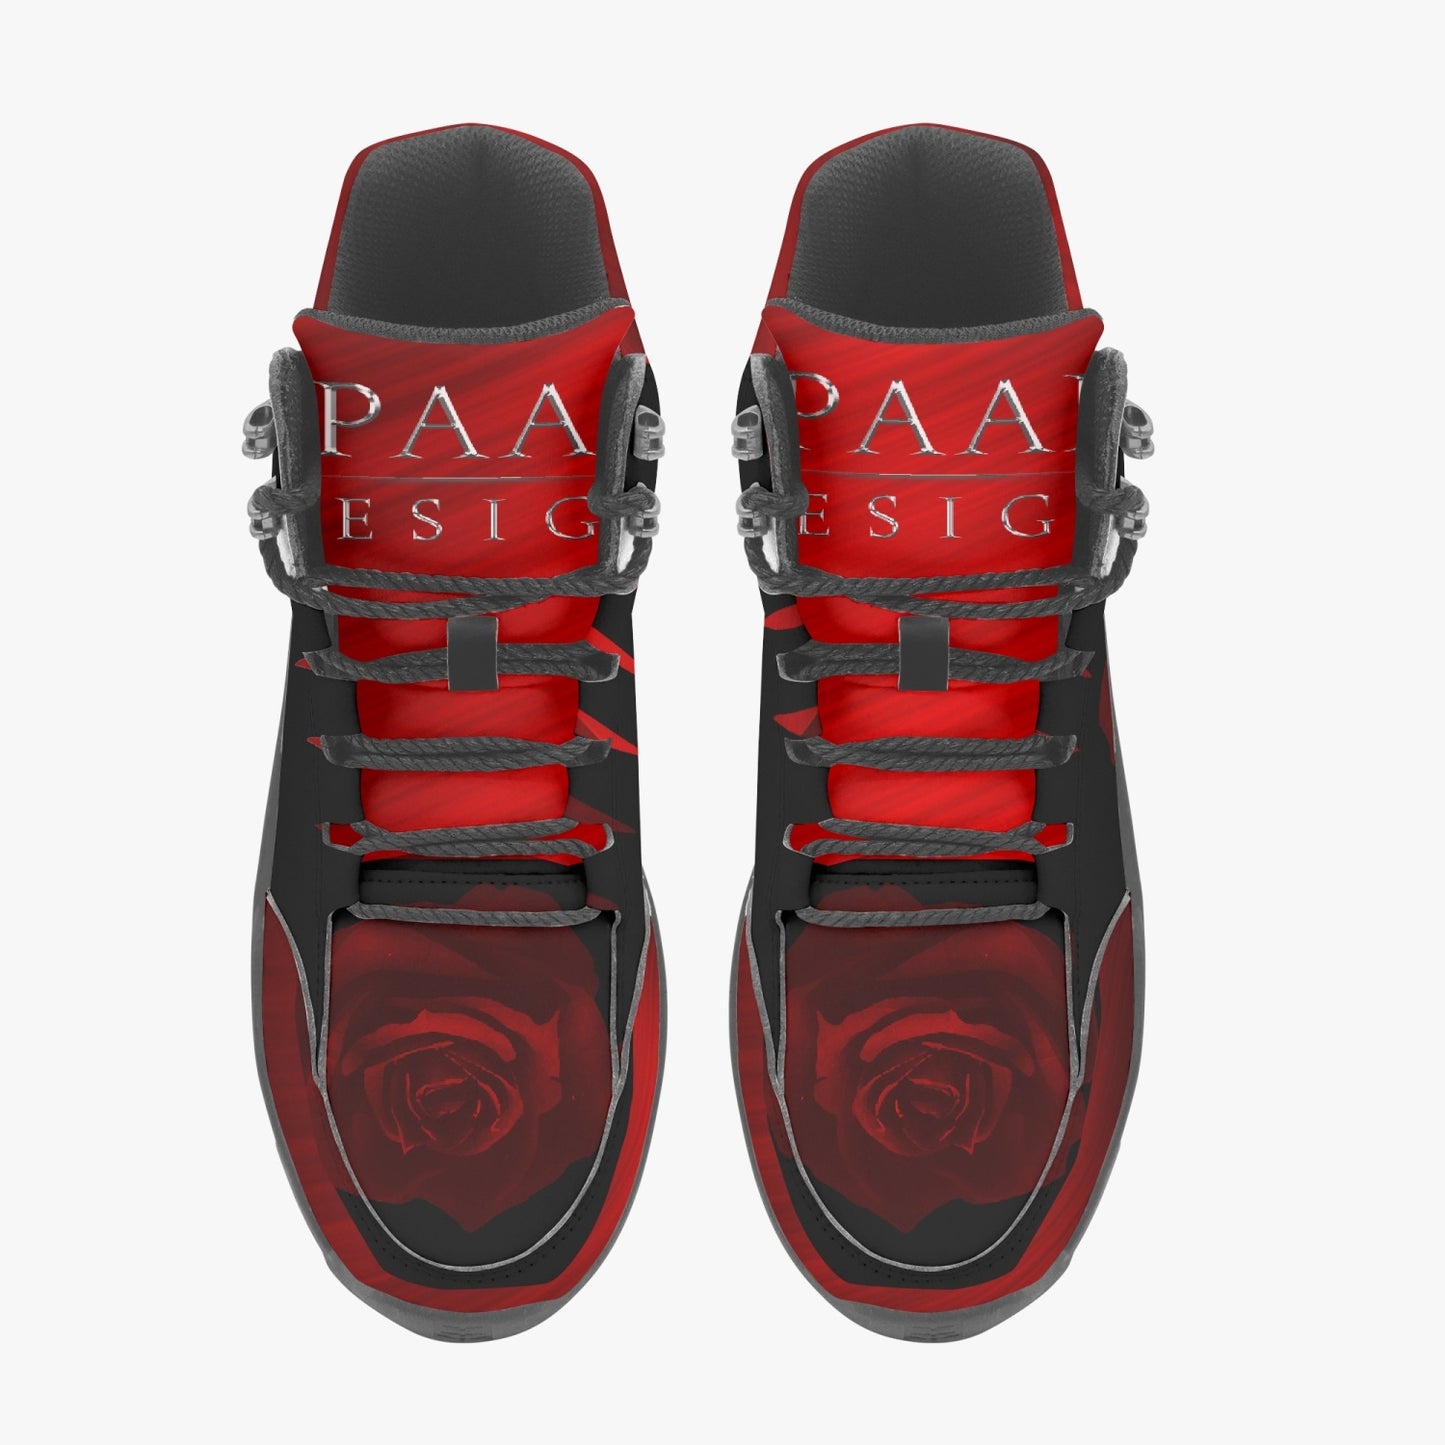 Red Roses Dark red Boots